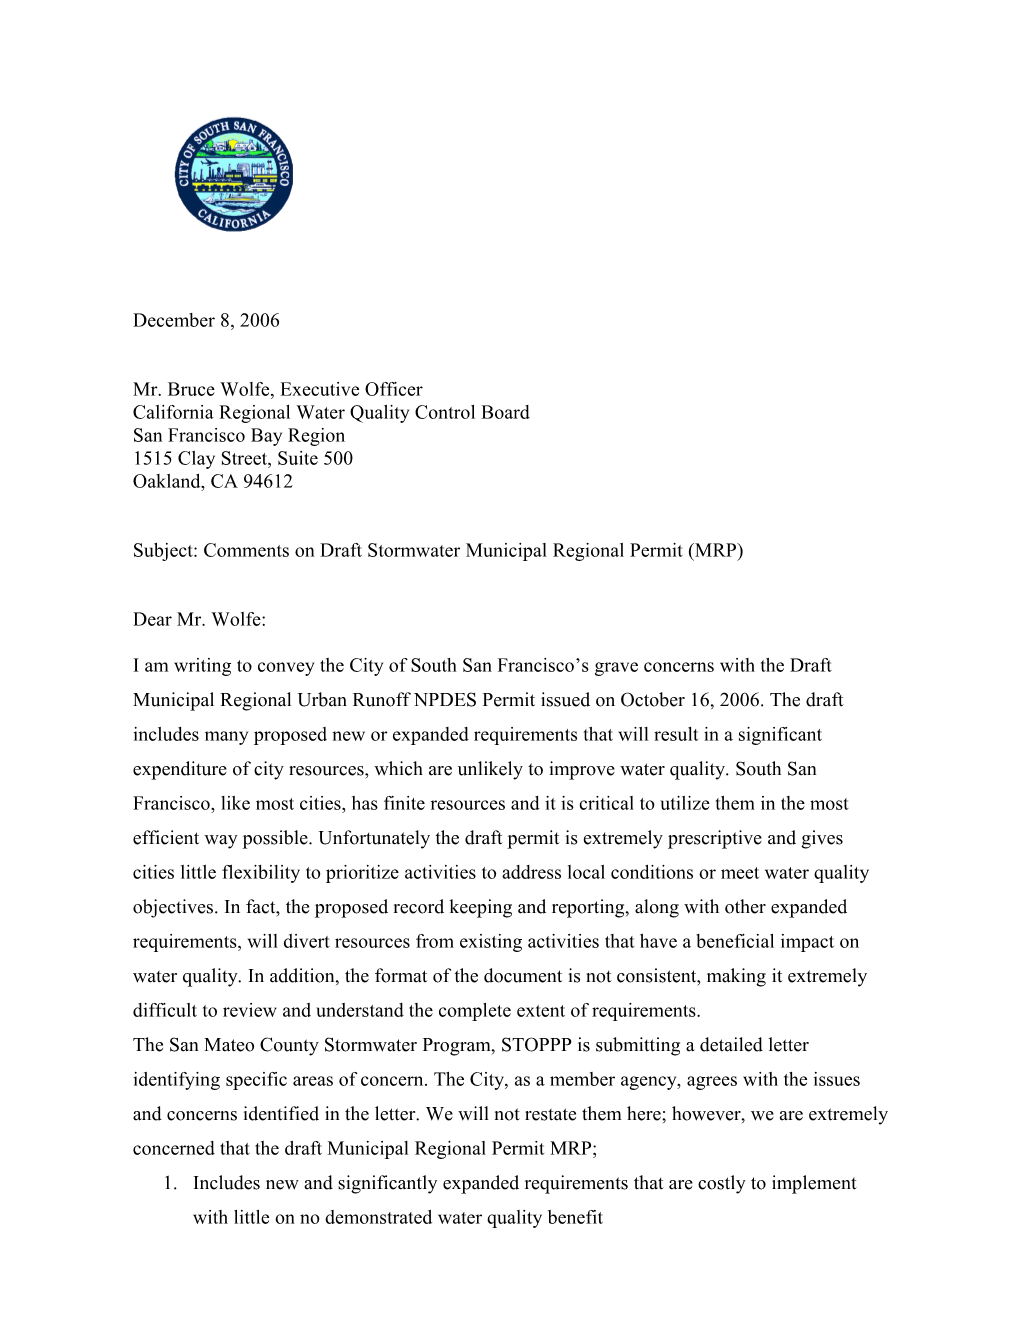 Subject: Comments on Draft Stormwater Municipal Regional Permit (MRP)